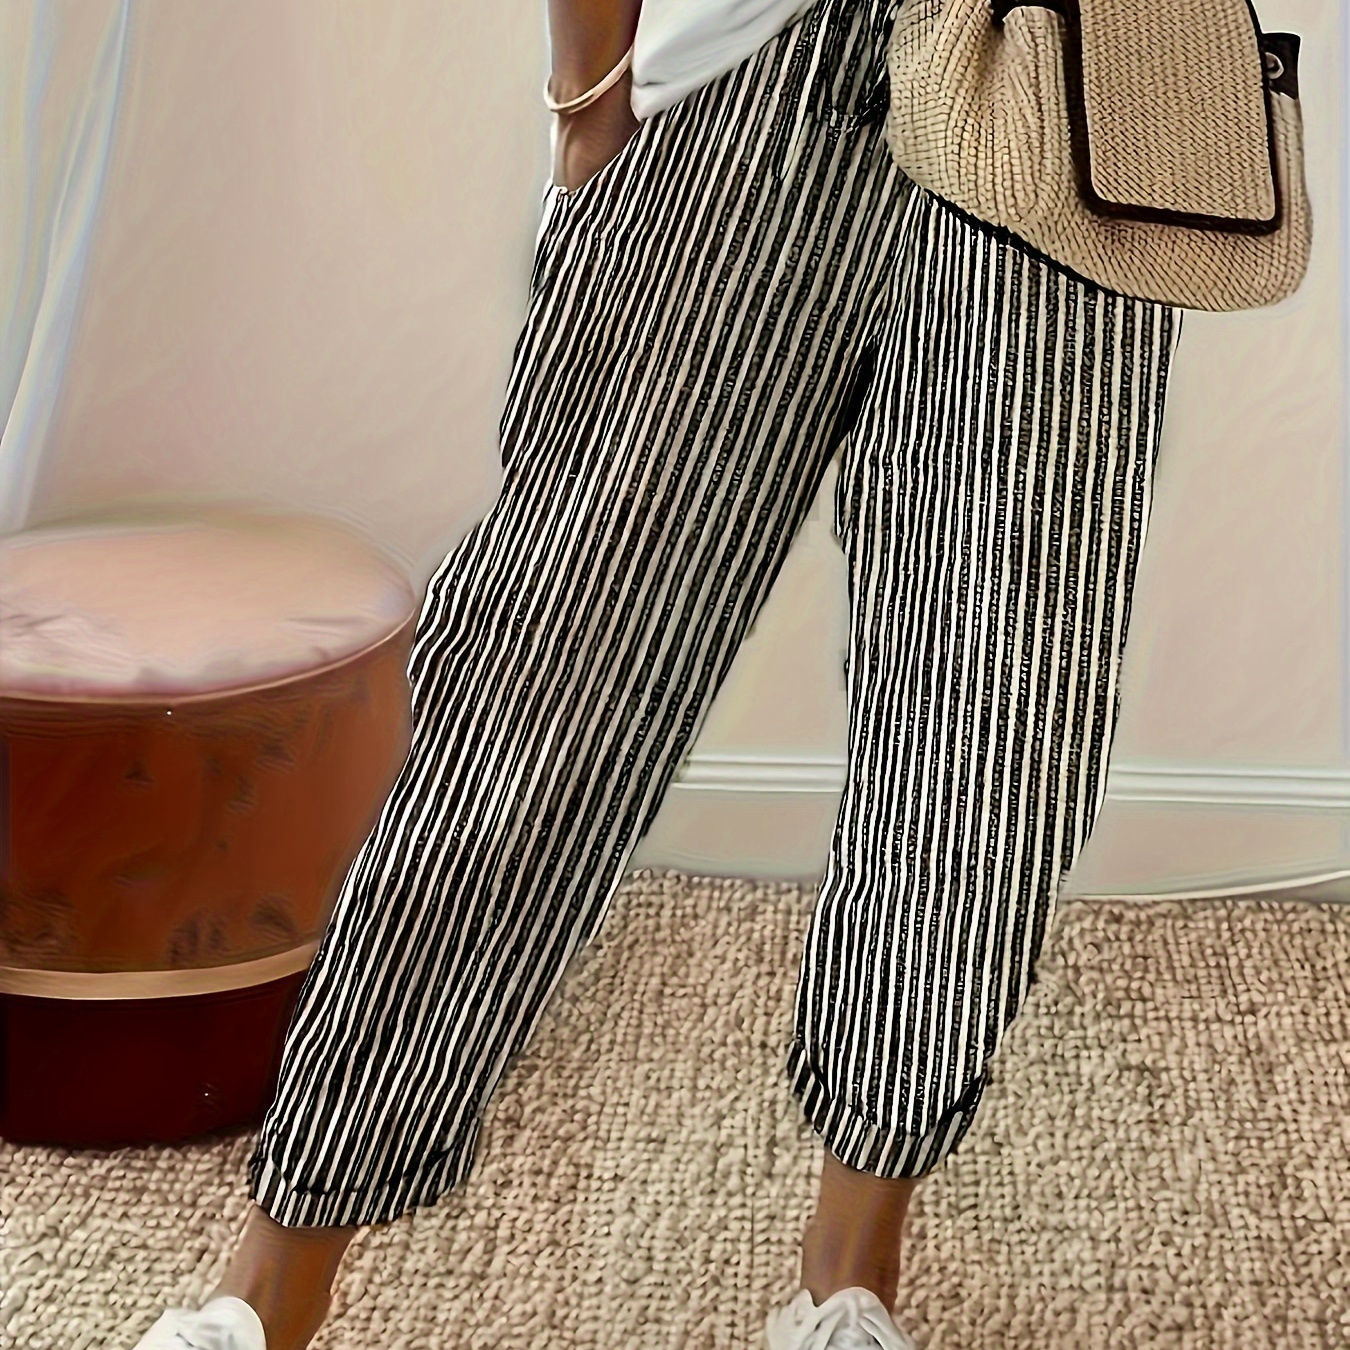 

Stripe Print Harem Pants, Casual Elastic Waist Baggy Pants For Every Day, Women's Clothing